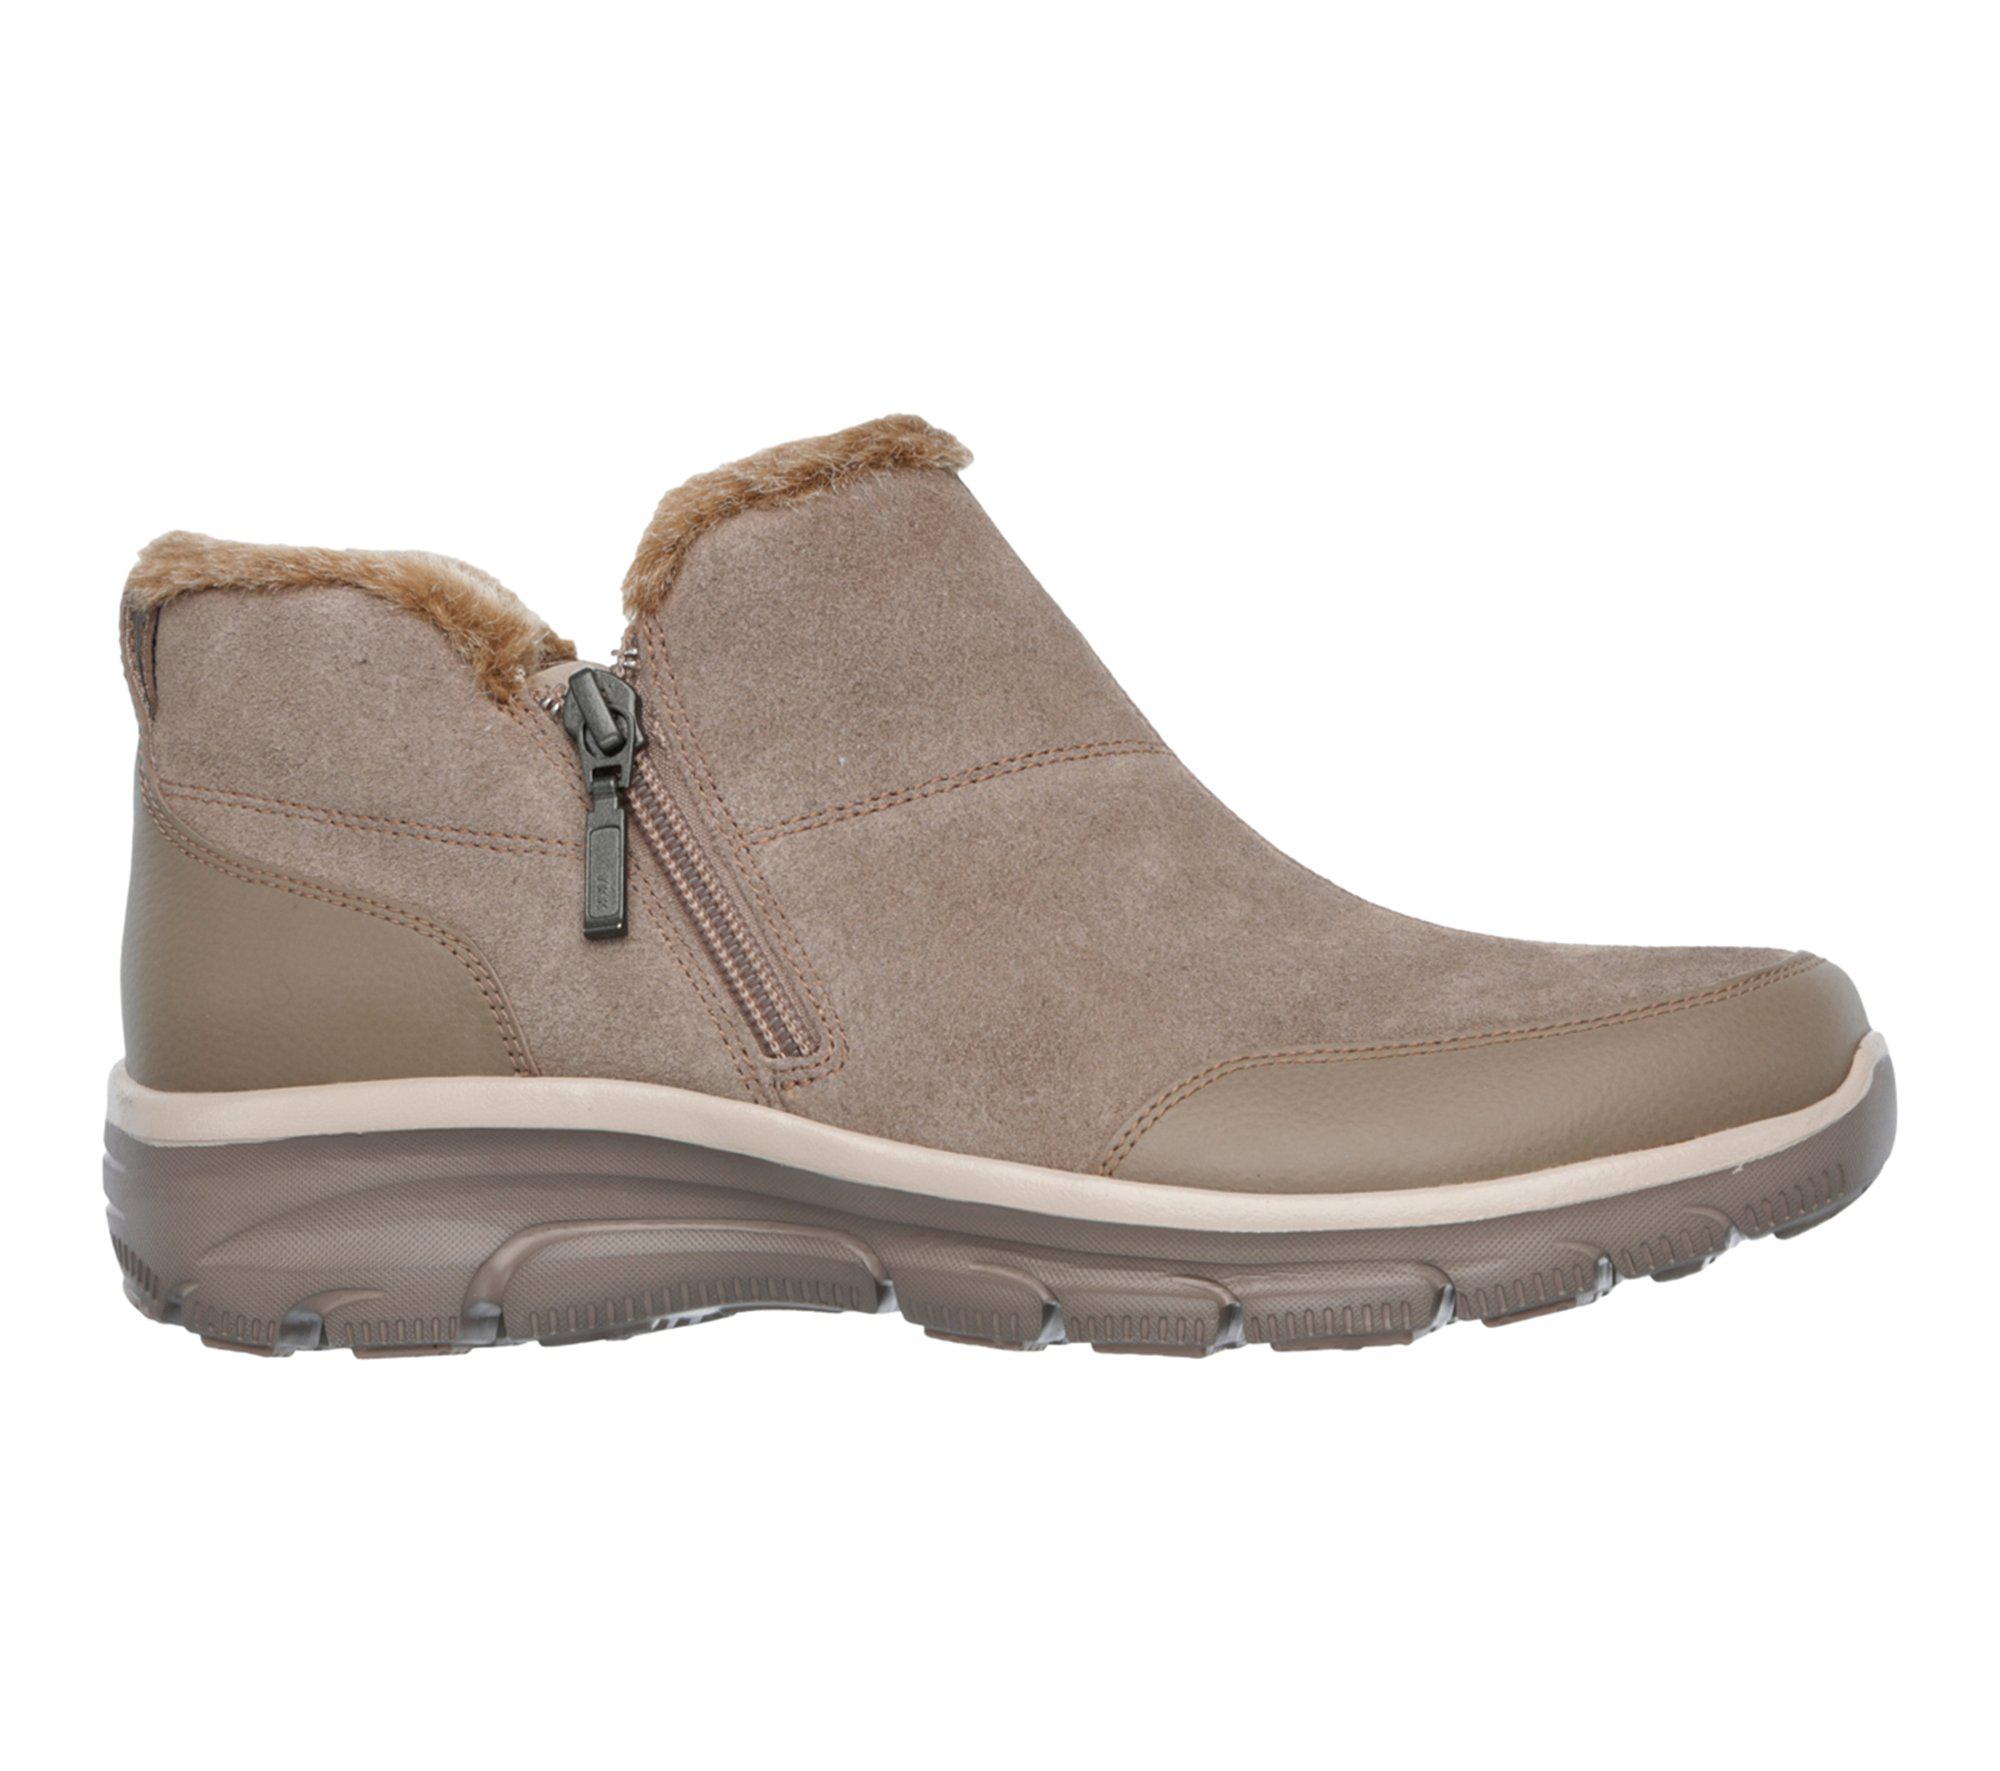 Skechers Suede Relaxed Fit: Easy Going - Zip It in Natural - Lyst